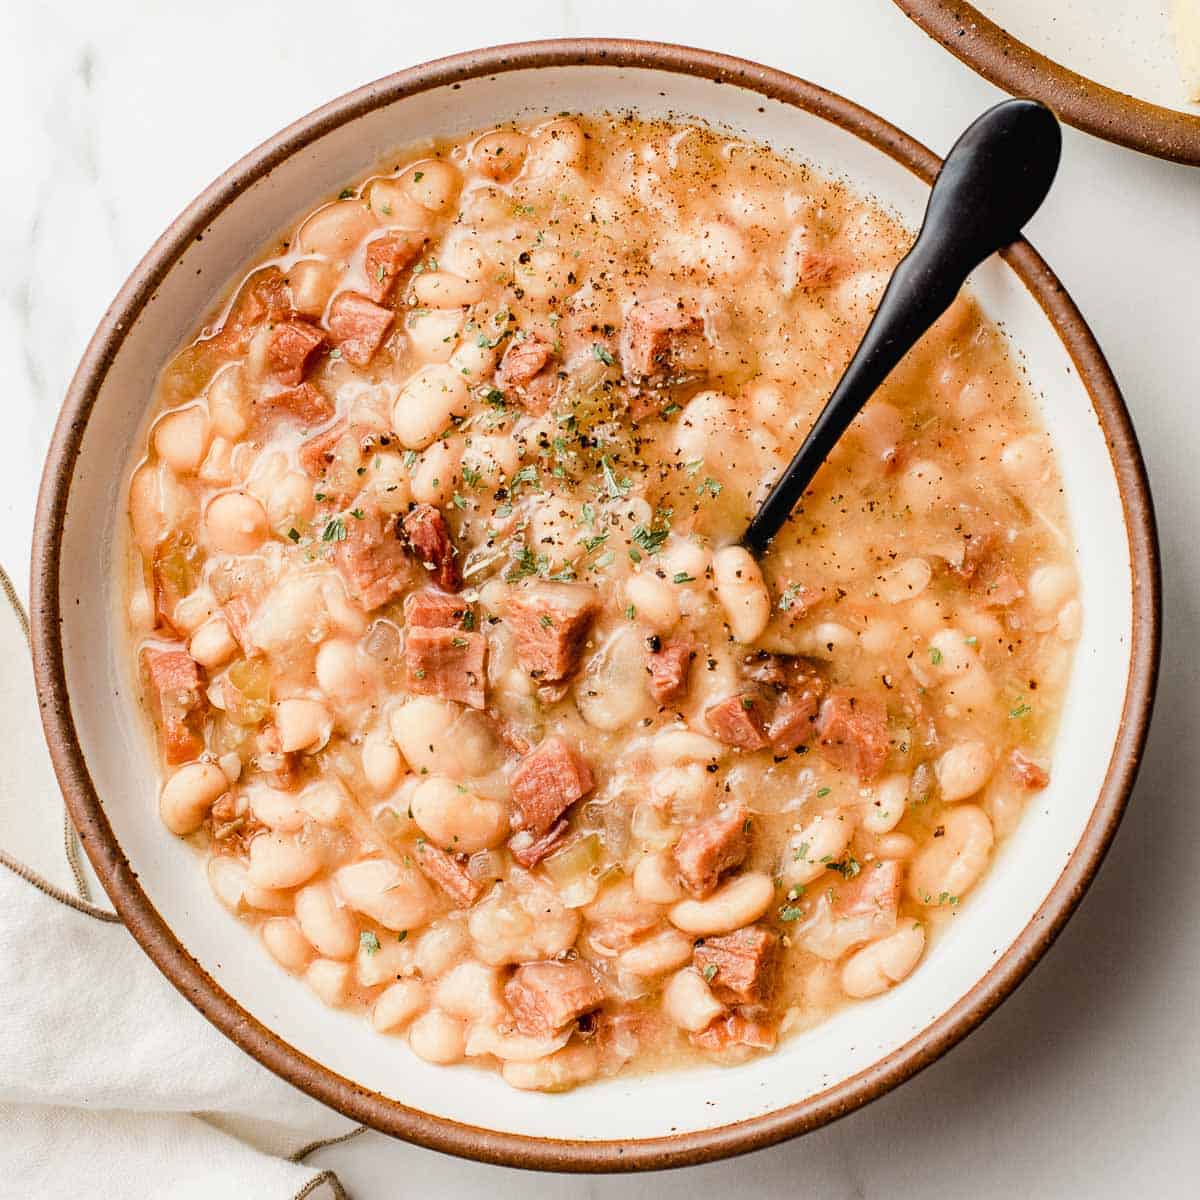 Slow cooker white beans and ham in a bowl.